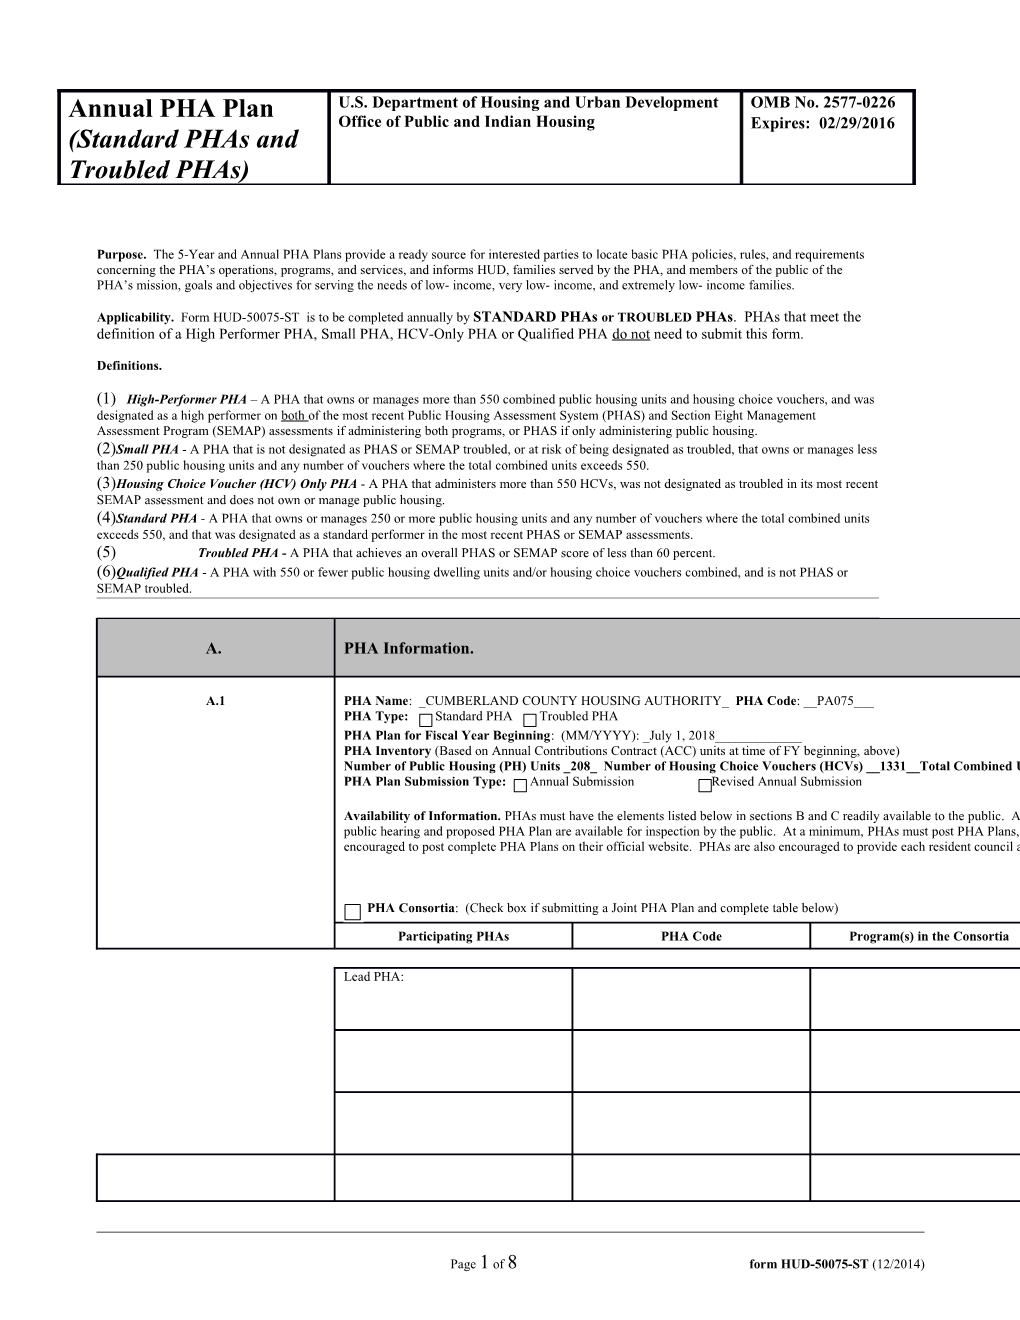 Page 1 of 8 Form HUD-50075-ST (12/2014)